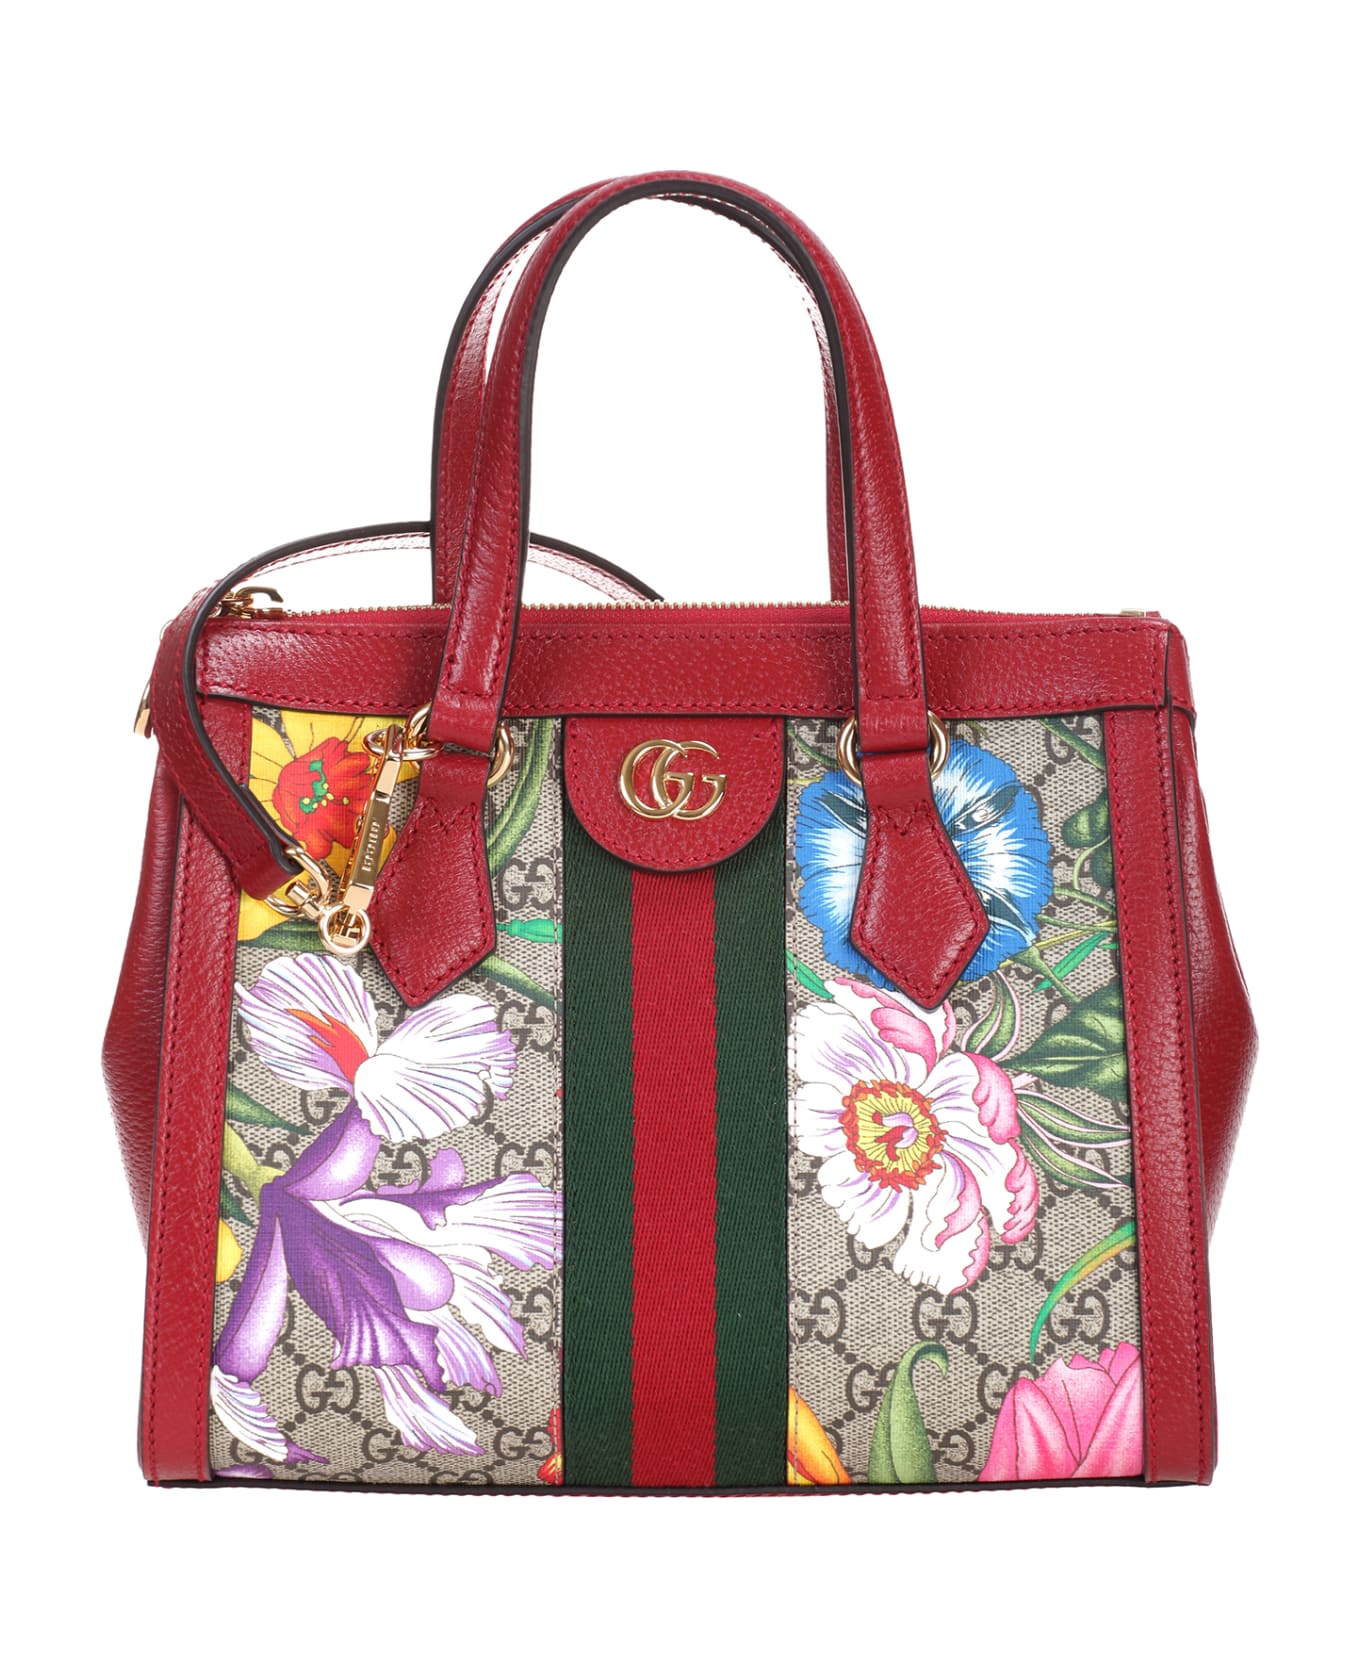 Gucci Ophidia shopping bag | italist